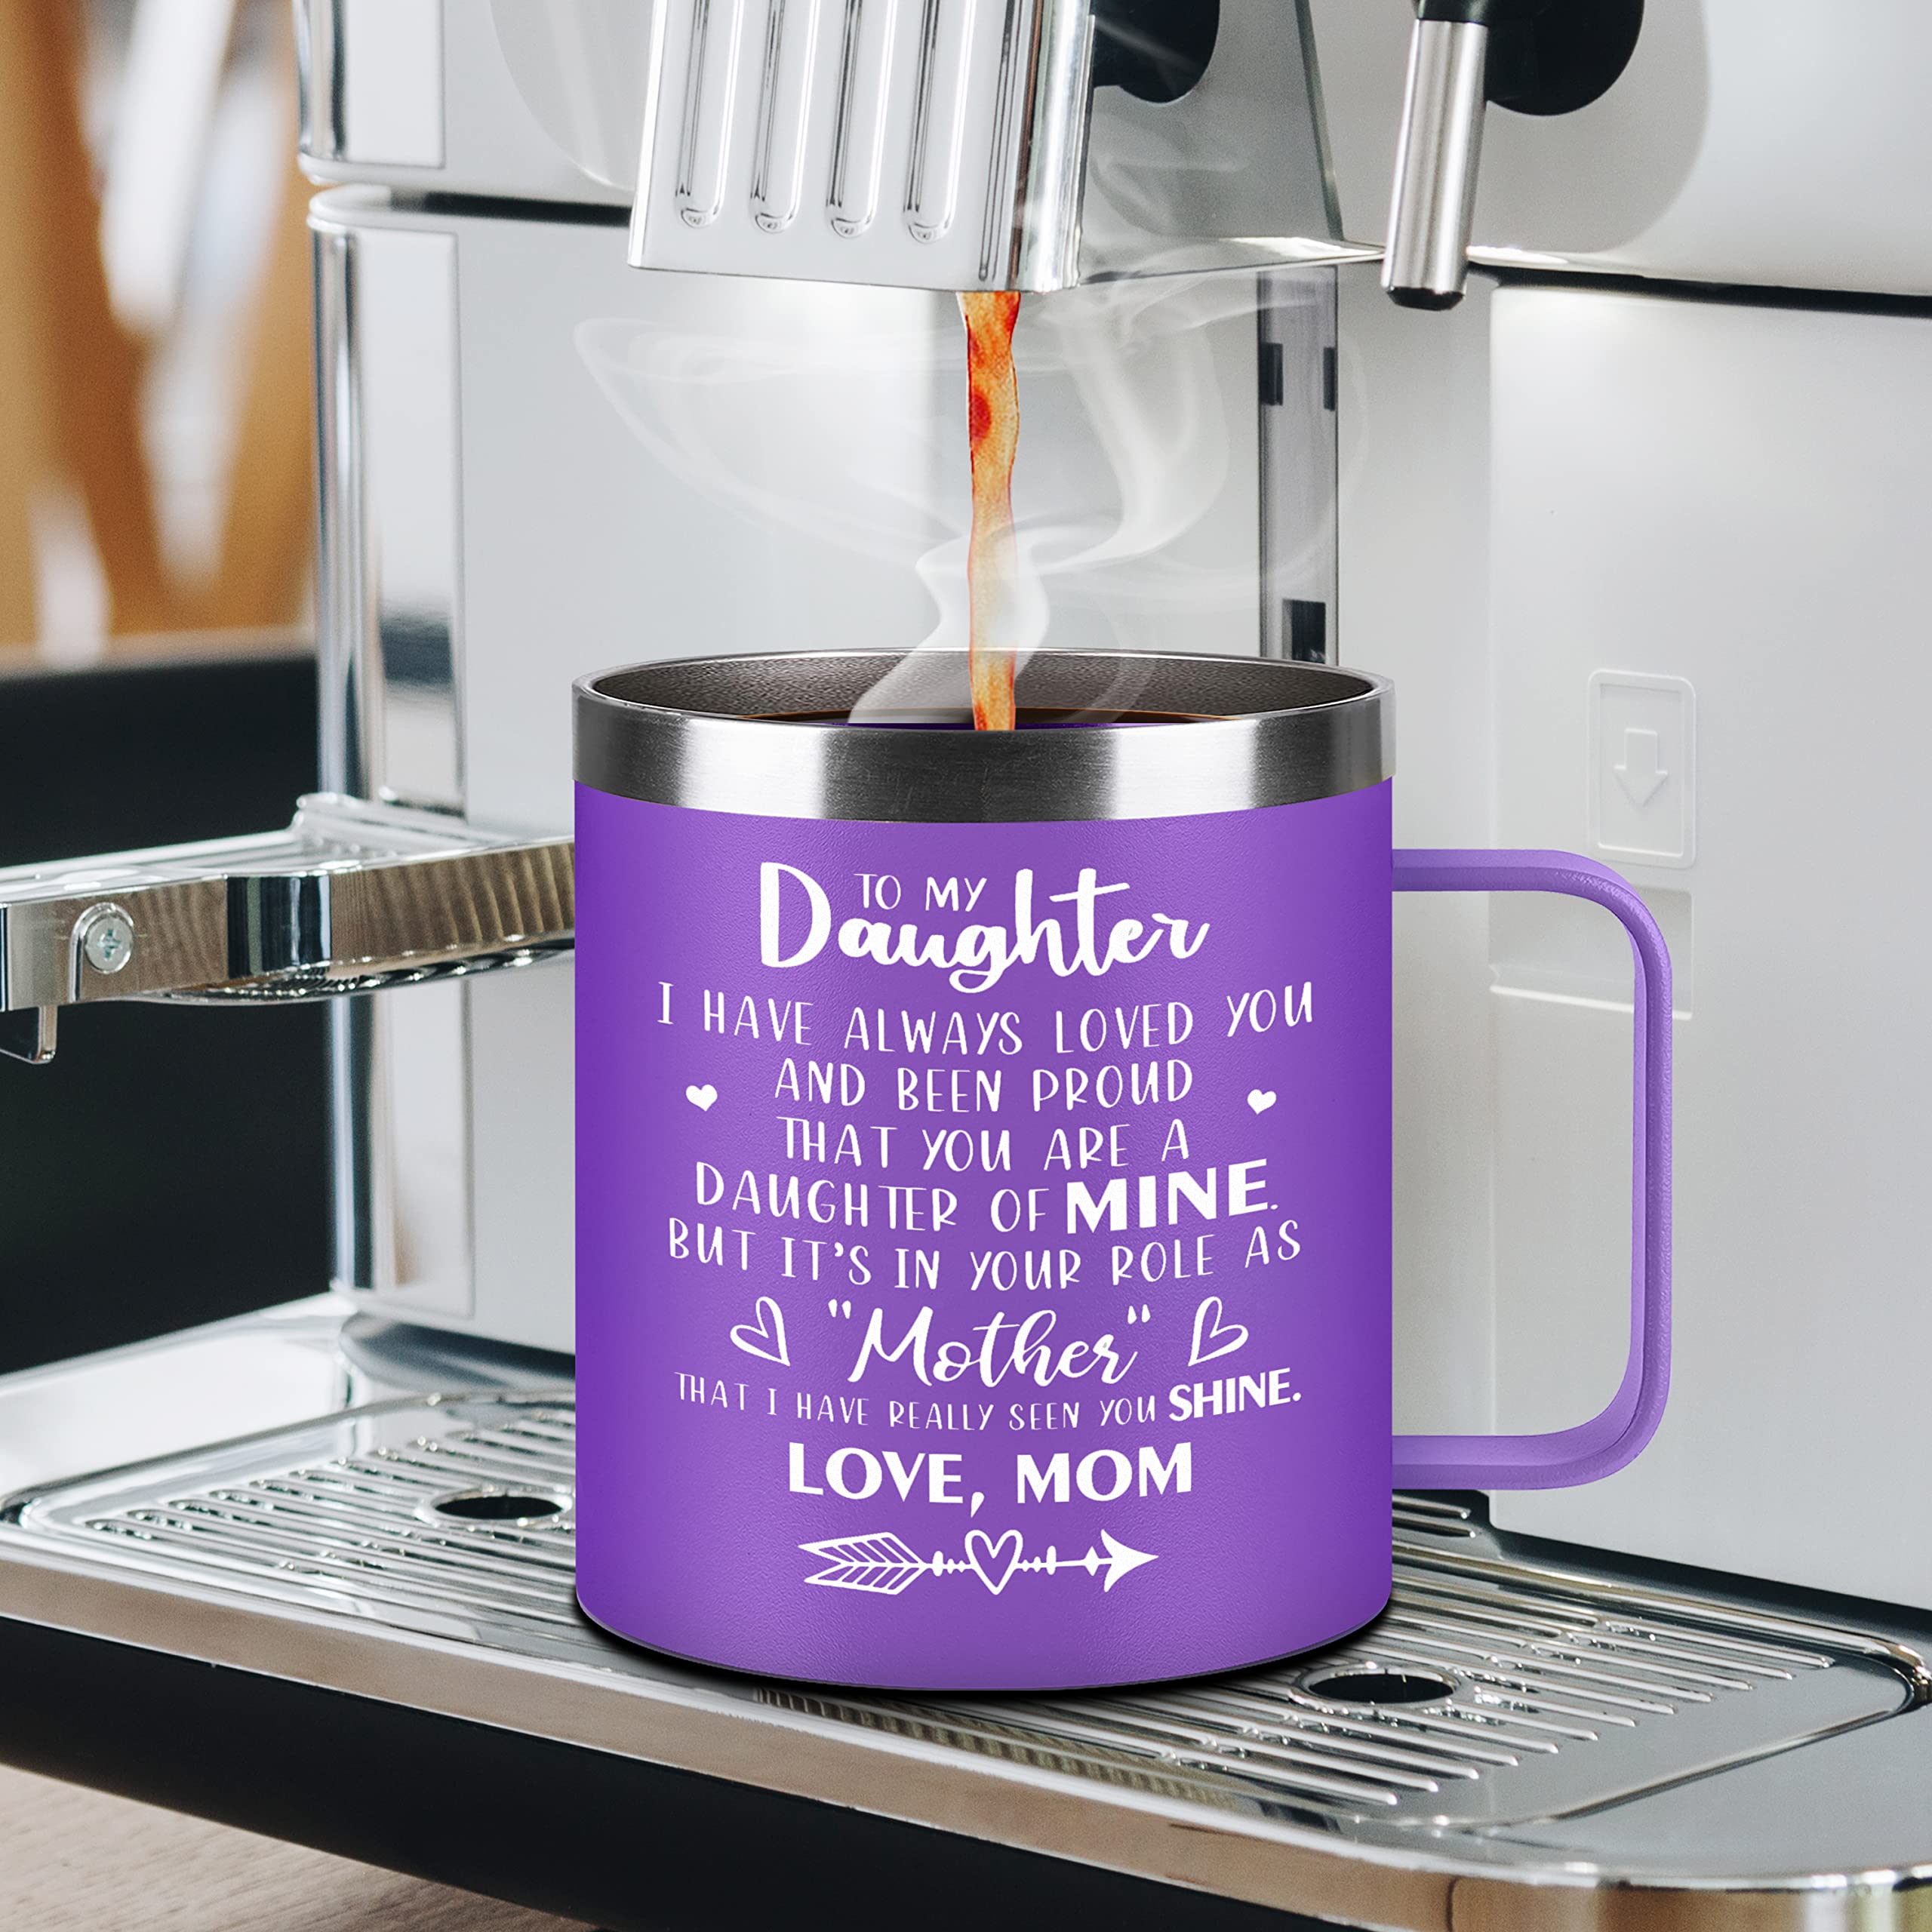 Hexagram Christmas Gifts for Daughter 14oz Mug, Daughter Gift from Mom, Gifts for Daughters from Mothers, Daughter Gifts, First Christmas Gifts for Daughter, To My Daughter, 18/8 Stainless Steel